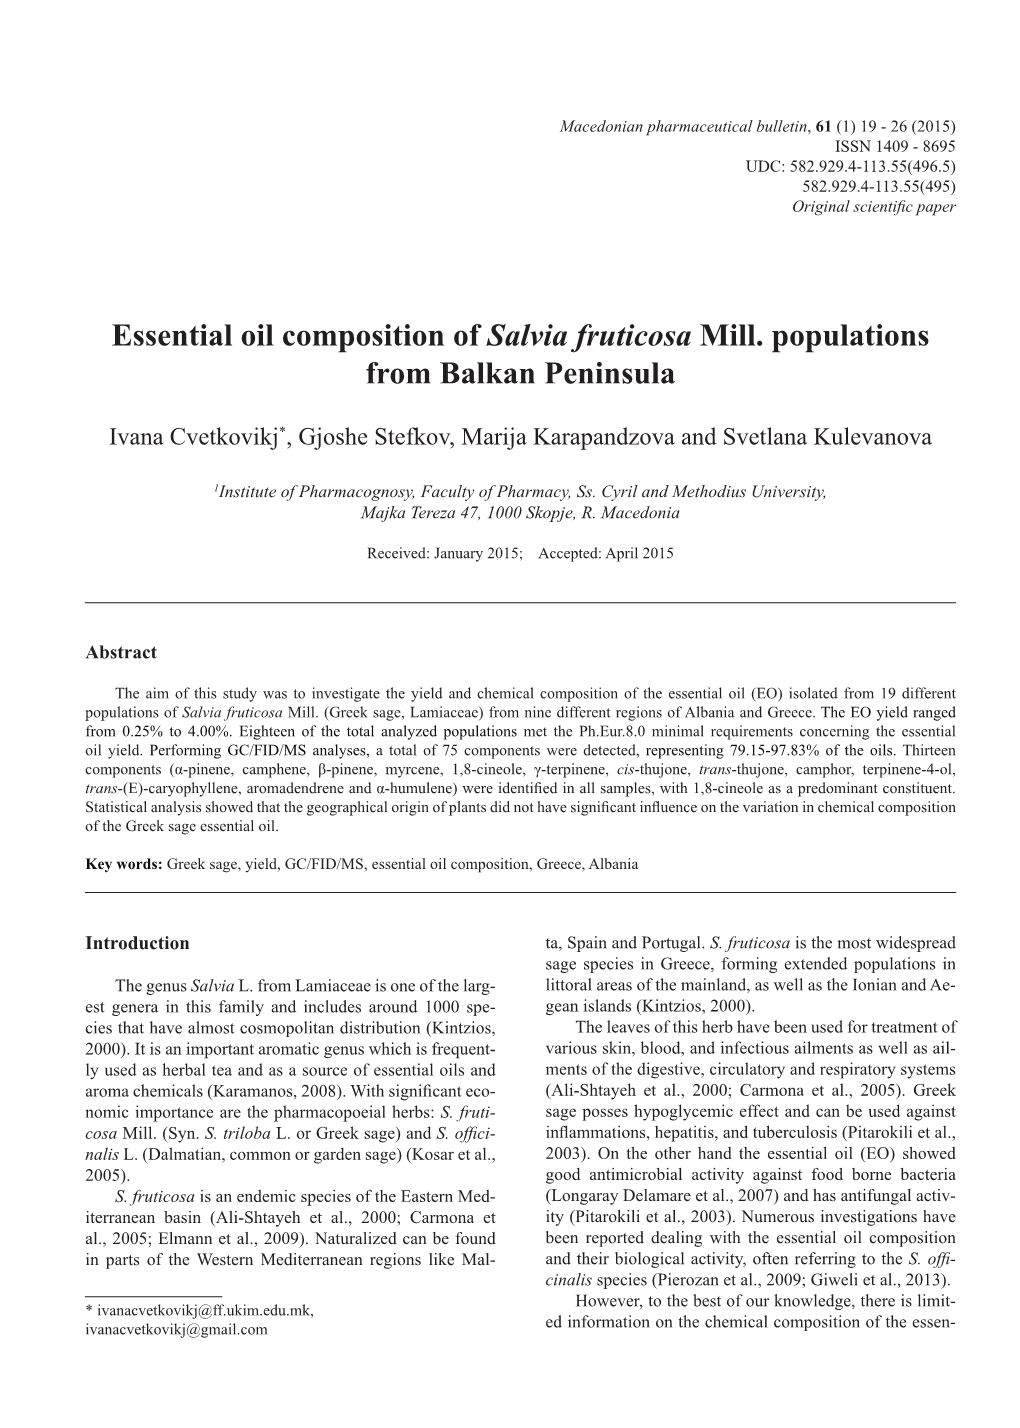 Essential Oil Composition of Salvia Fruticosa Mill. Populations from Balkan Peninsula